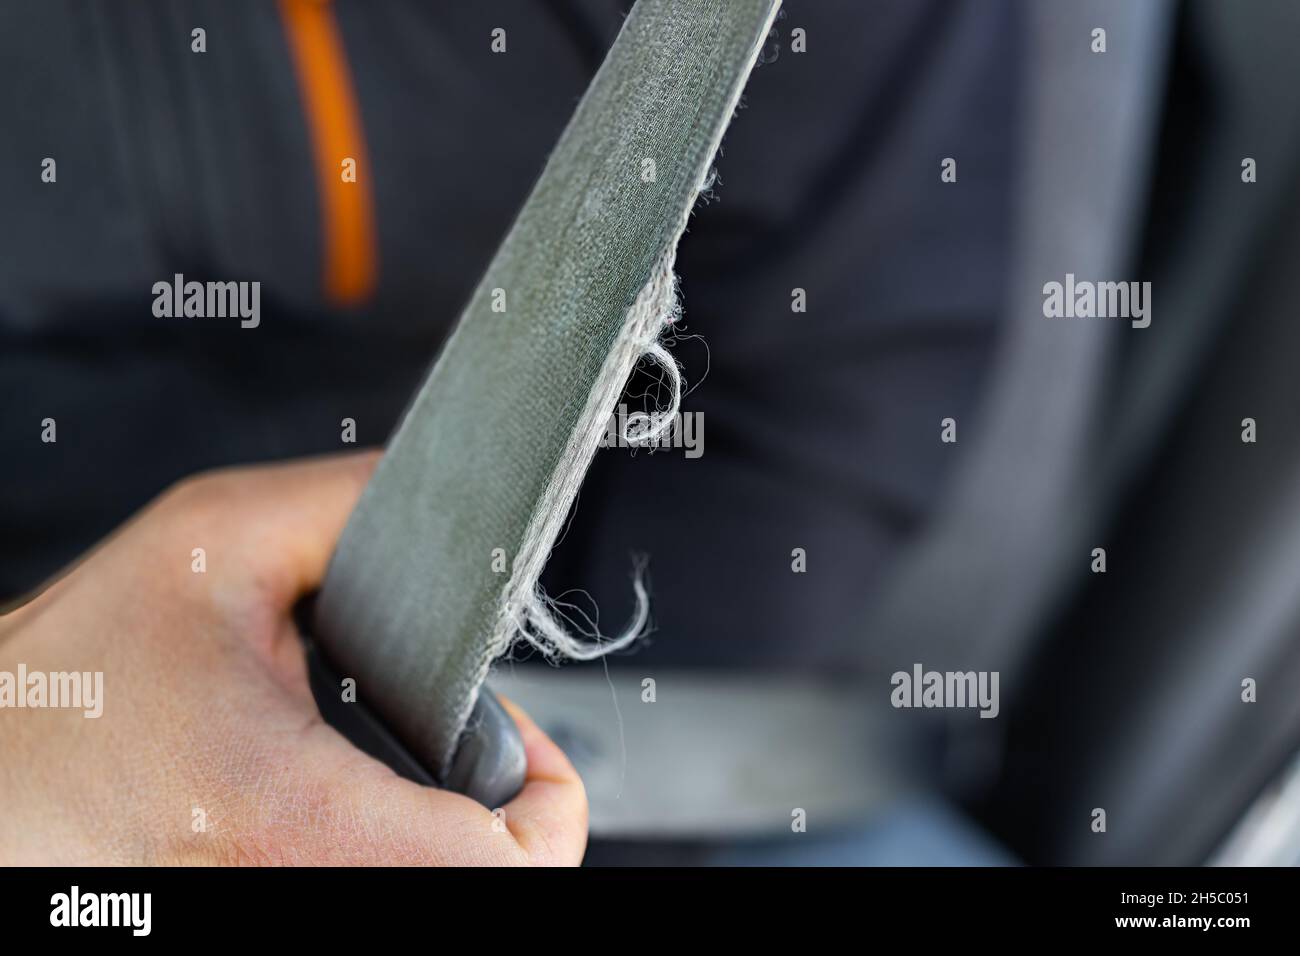 Macro closeup of man driver or passenger holding pulling old frayed ripped torn damaged car vehicle seat belt or seatbelt Stock Photo